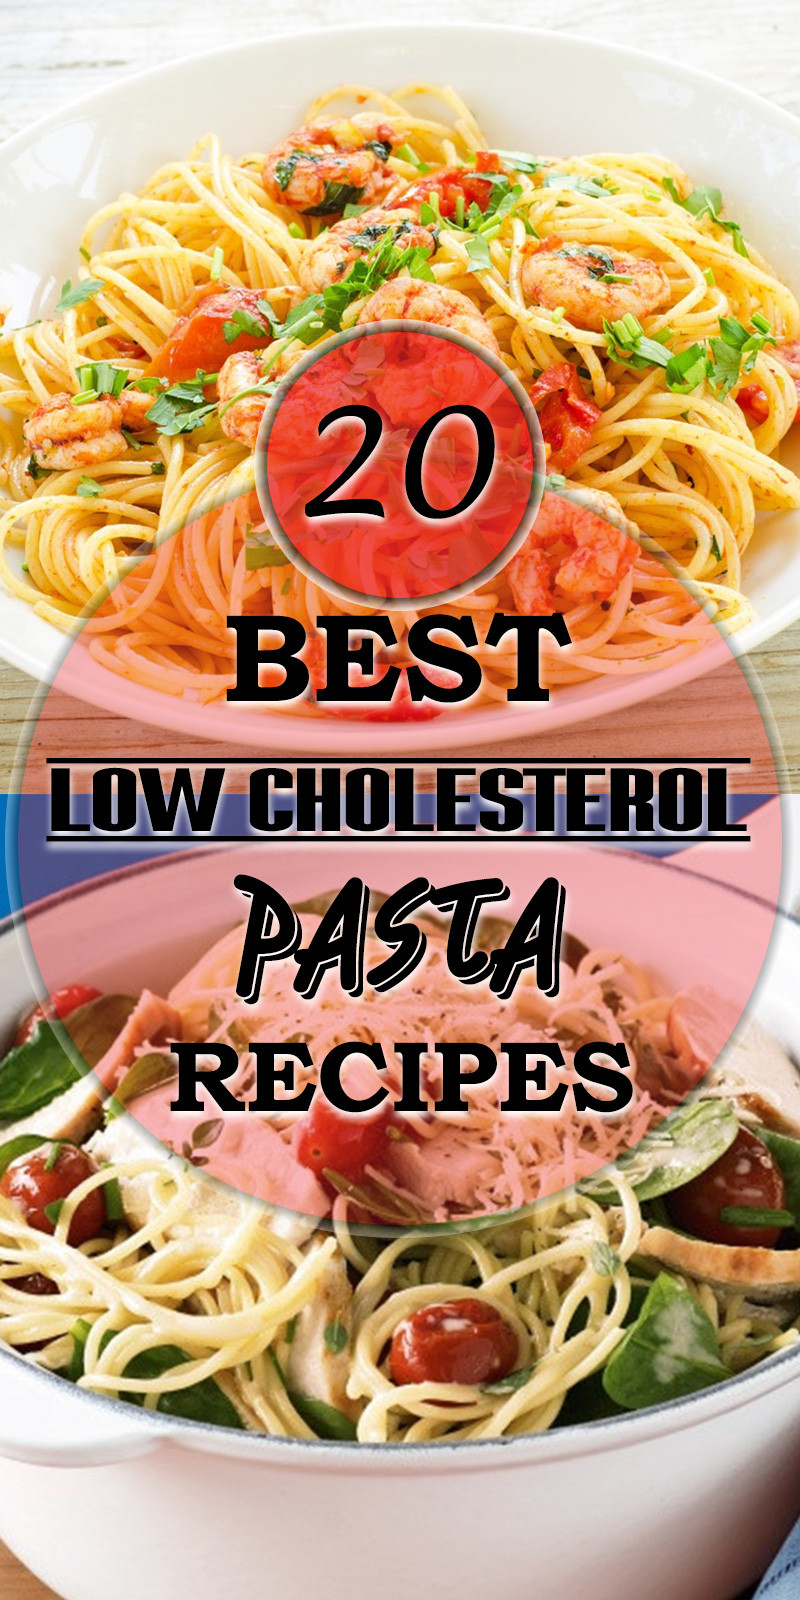 Low Cholesterol Pasta Recipes
 Top 20 Low Cholesterol Pasta Recipes Best Diet and